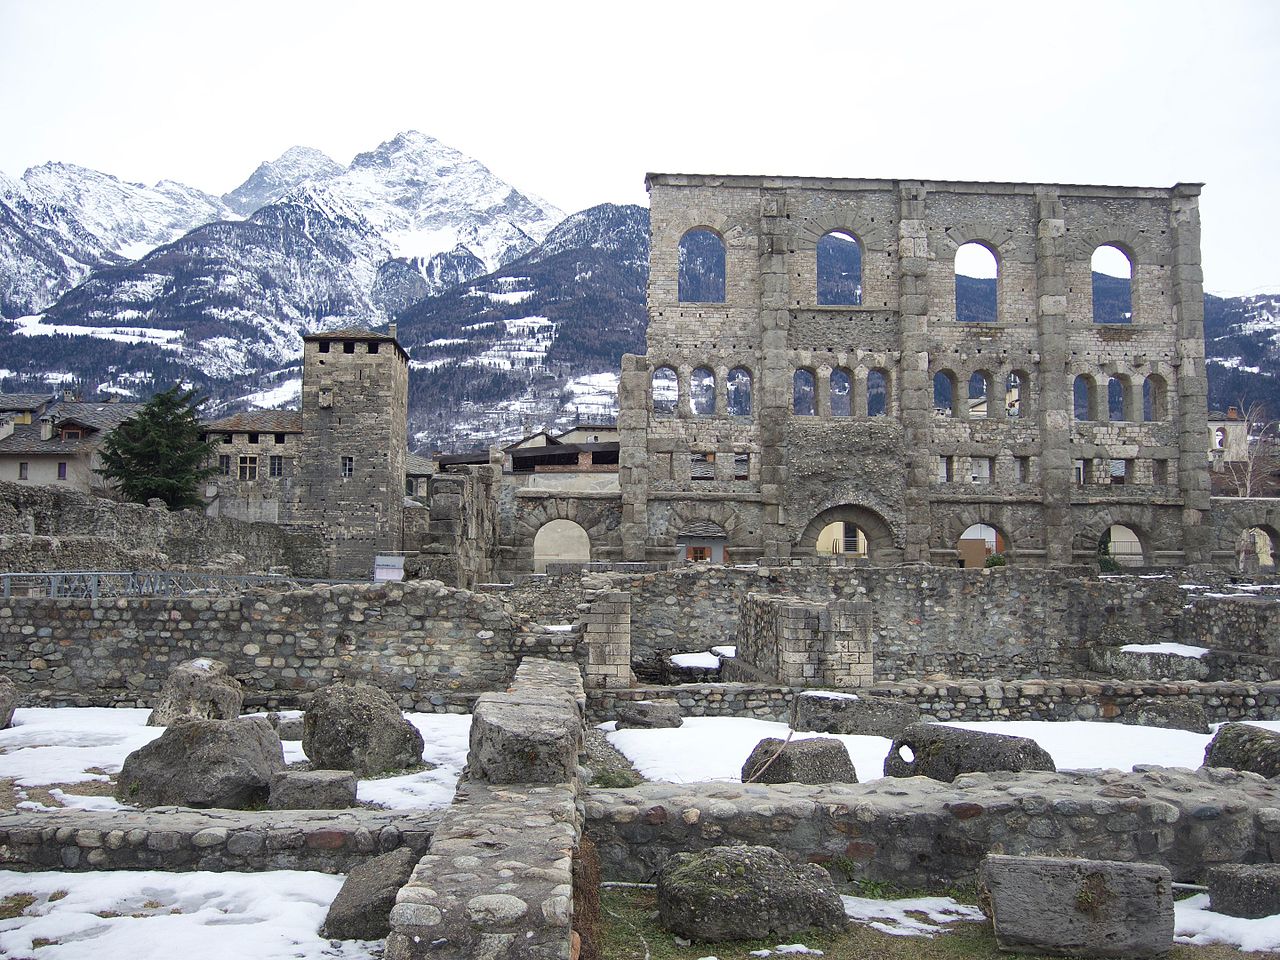 What to do in Valle d'Aosta if you're not into hiking?